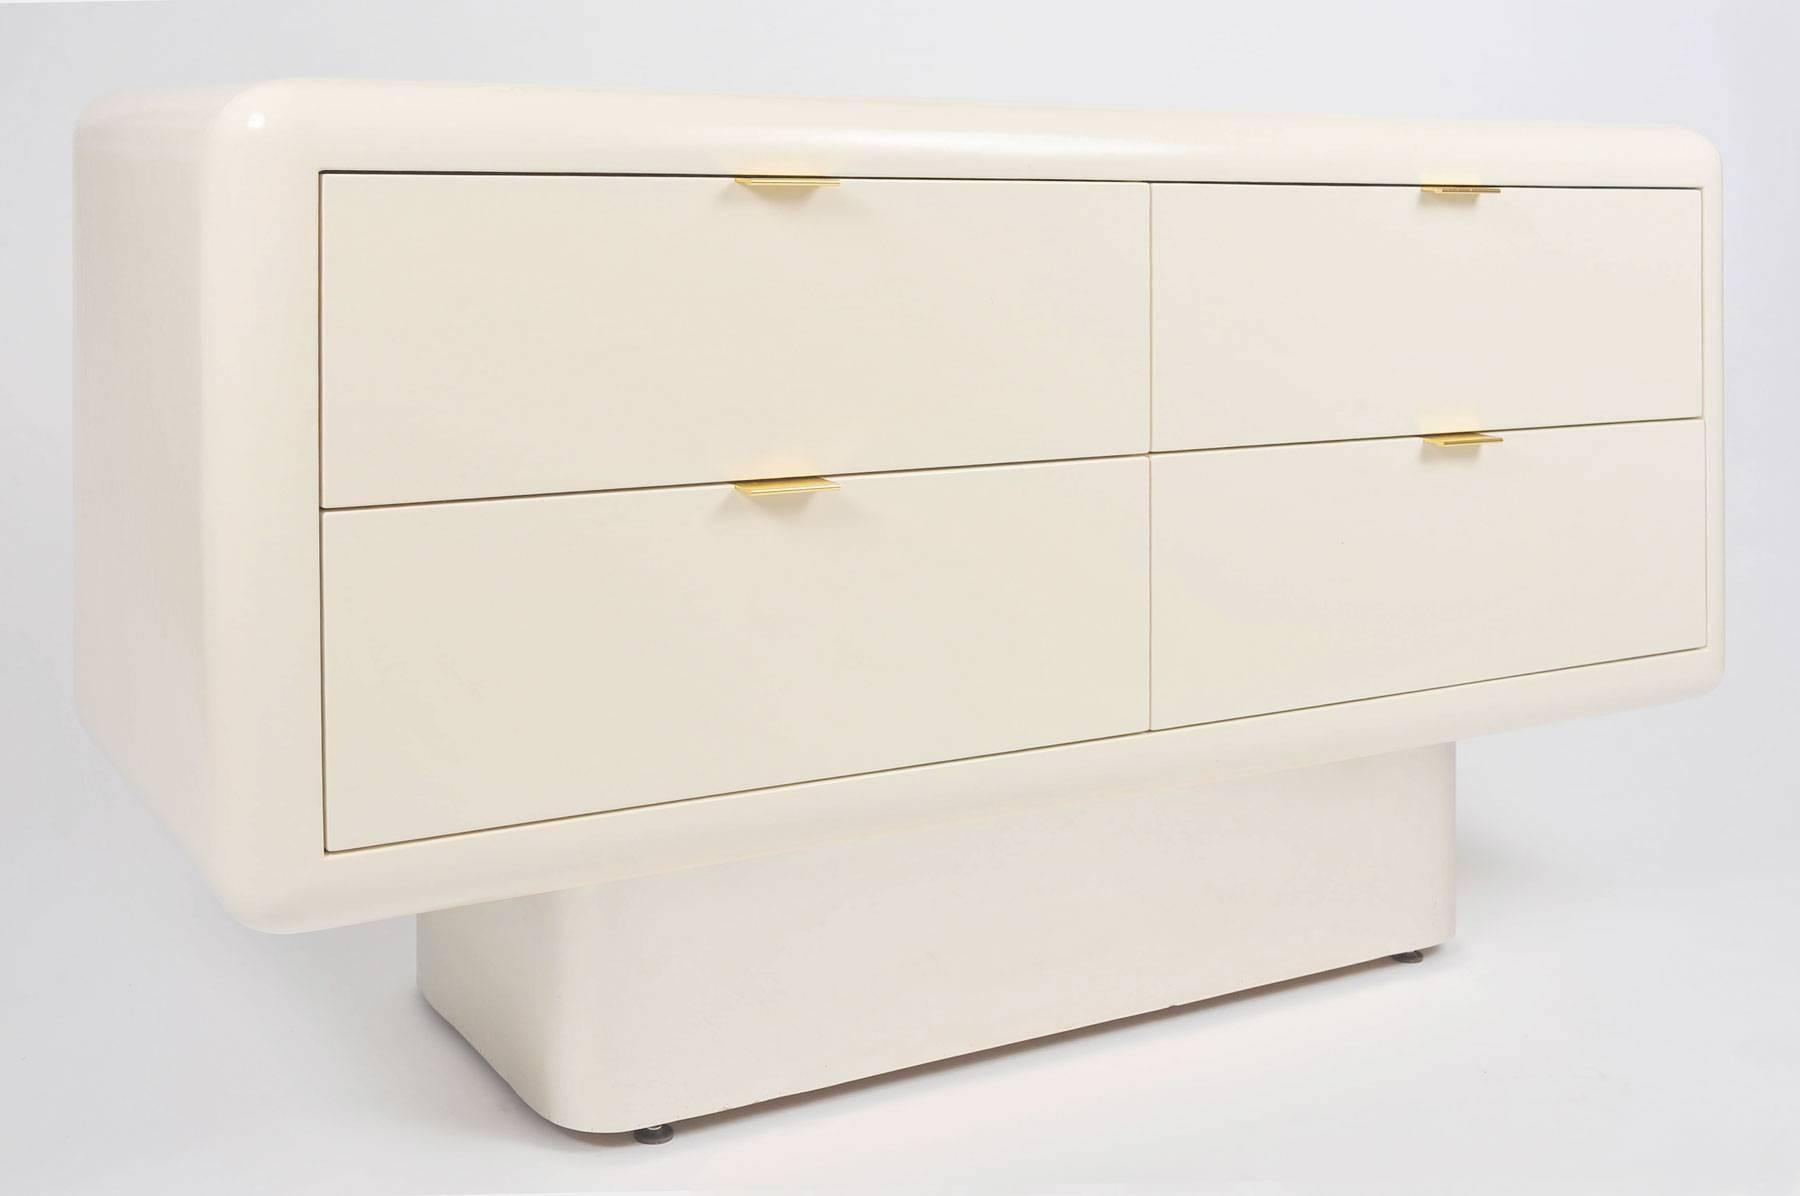 Fabulous smooth, curved-edge, cream, lacquered chest-of-drawers designed by Steve Chase. Four drawers with simple brass handles. Sits on inset silver metal curved base.
Pair of matching night stands also available.